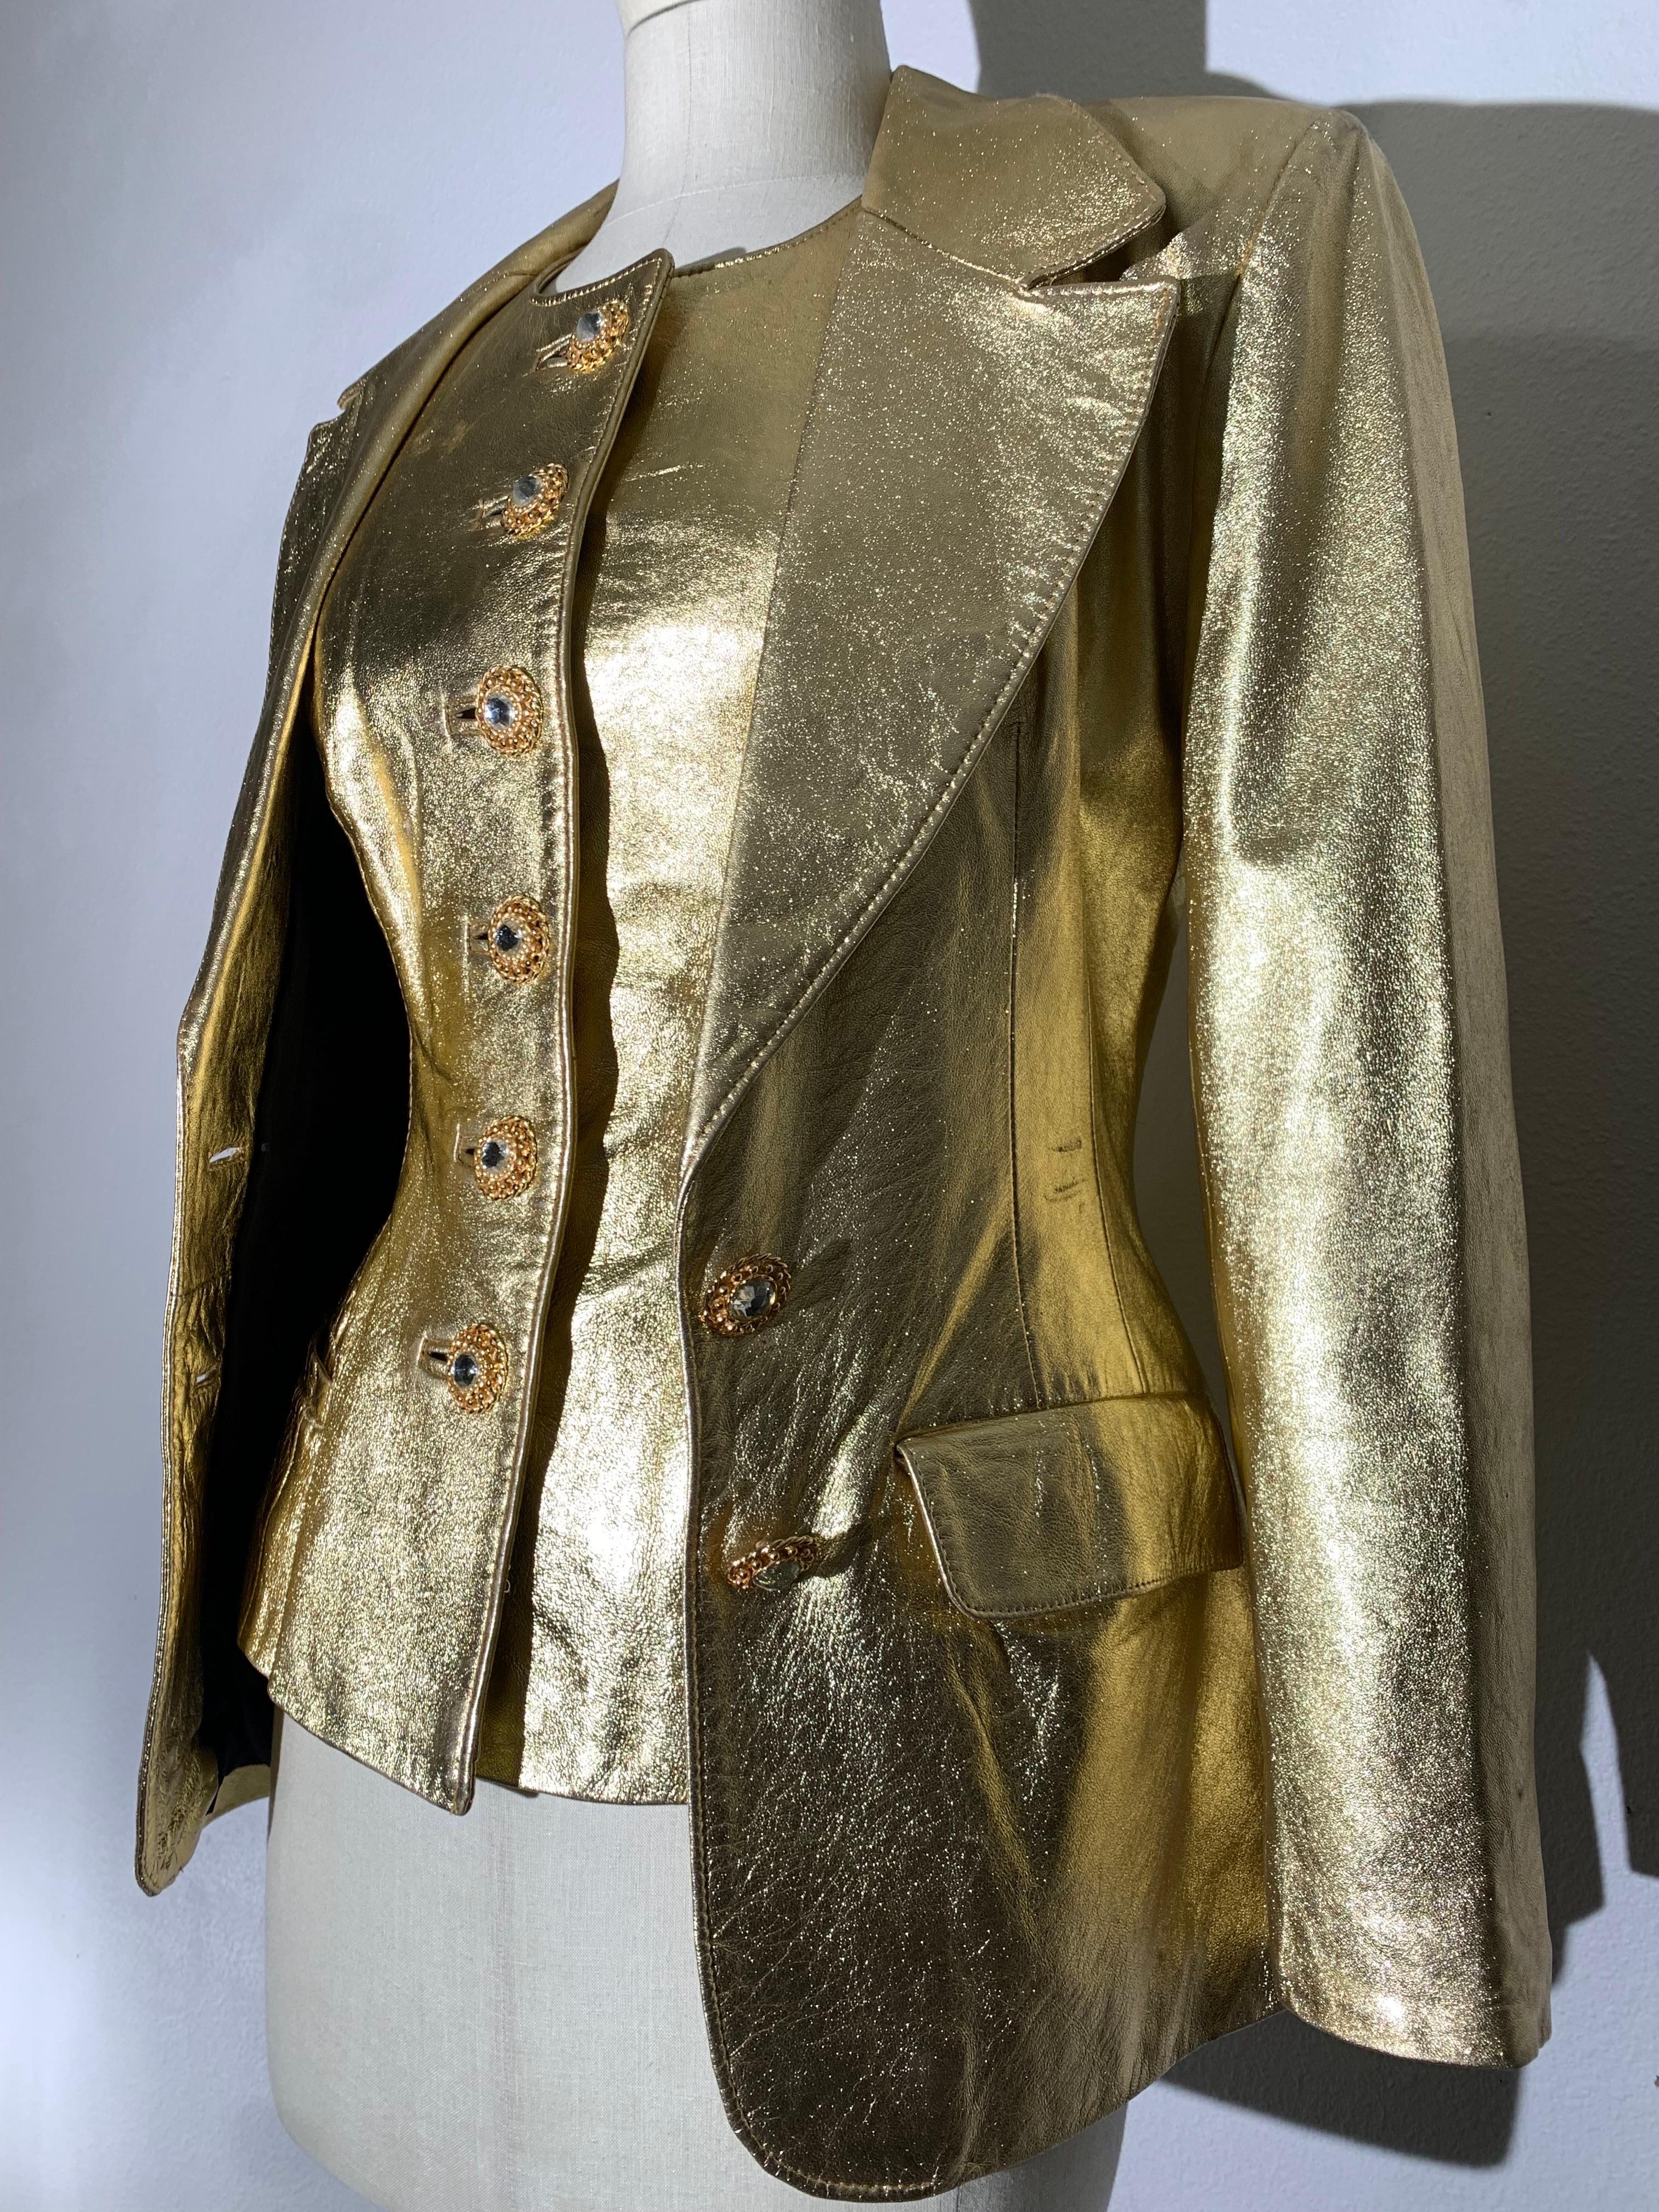 1980s Lillie Rubin 2-Piece Gold Metallic Lambskin Leather Vest & Jacket Ensemble:  Western-cut with body-conscious tailoring in vest and jacket. Gold jeweled buttons on both vest and jacket. Wide notched lapels on jacket, flap pocket in jacket. Both